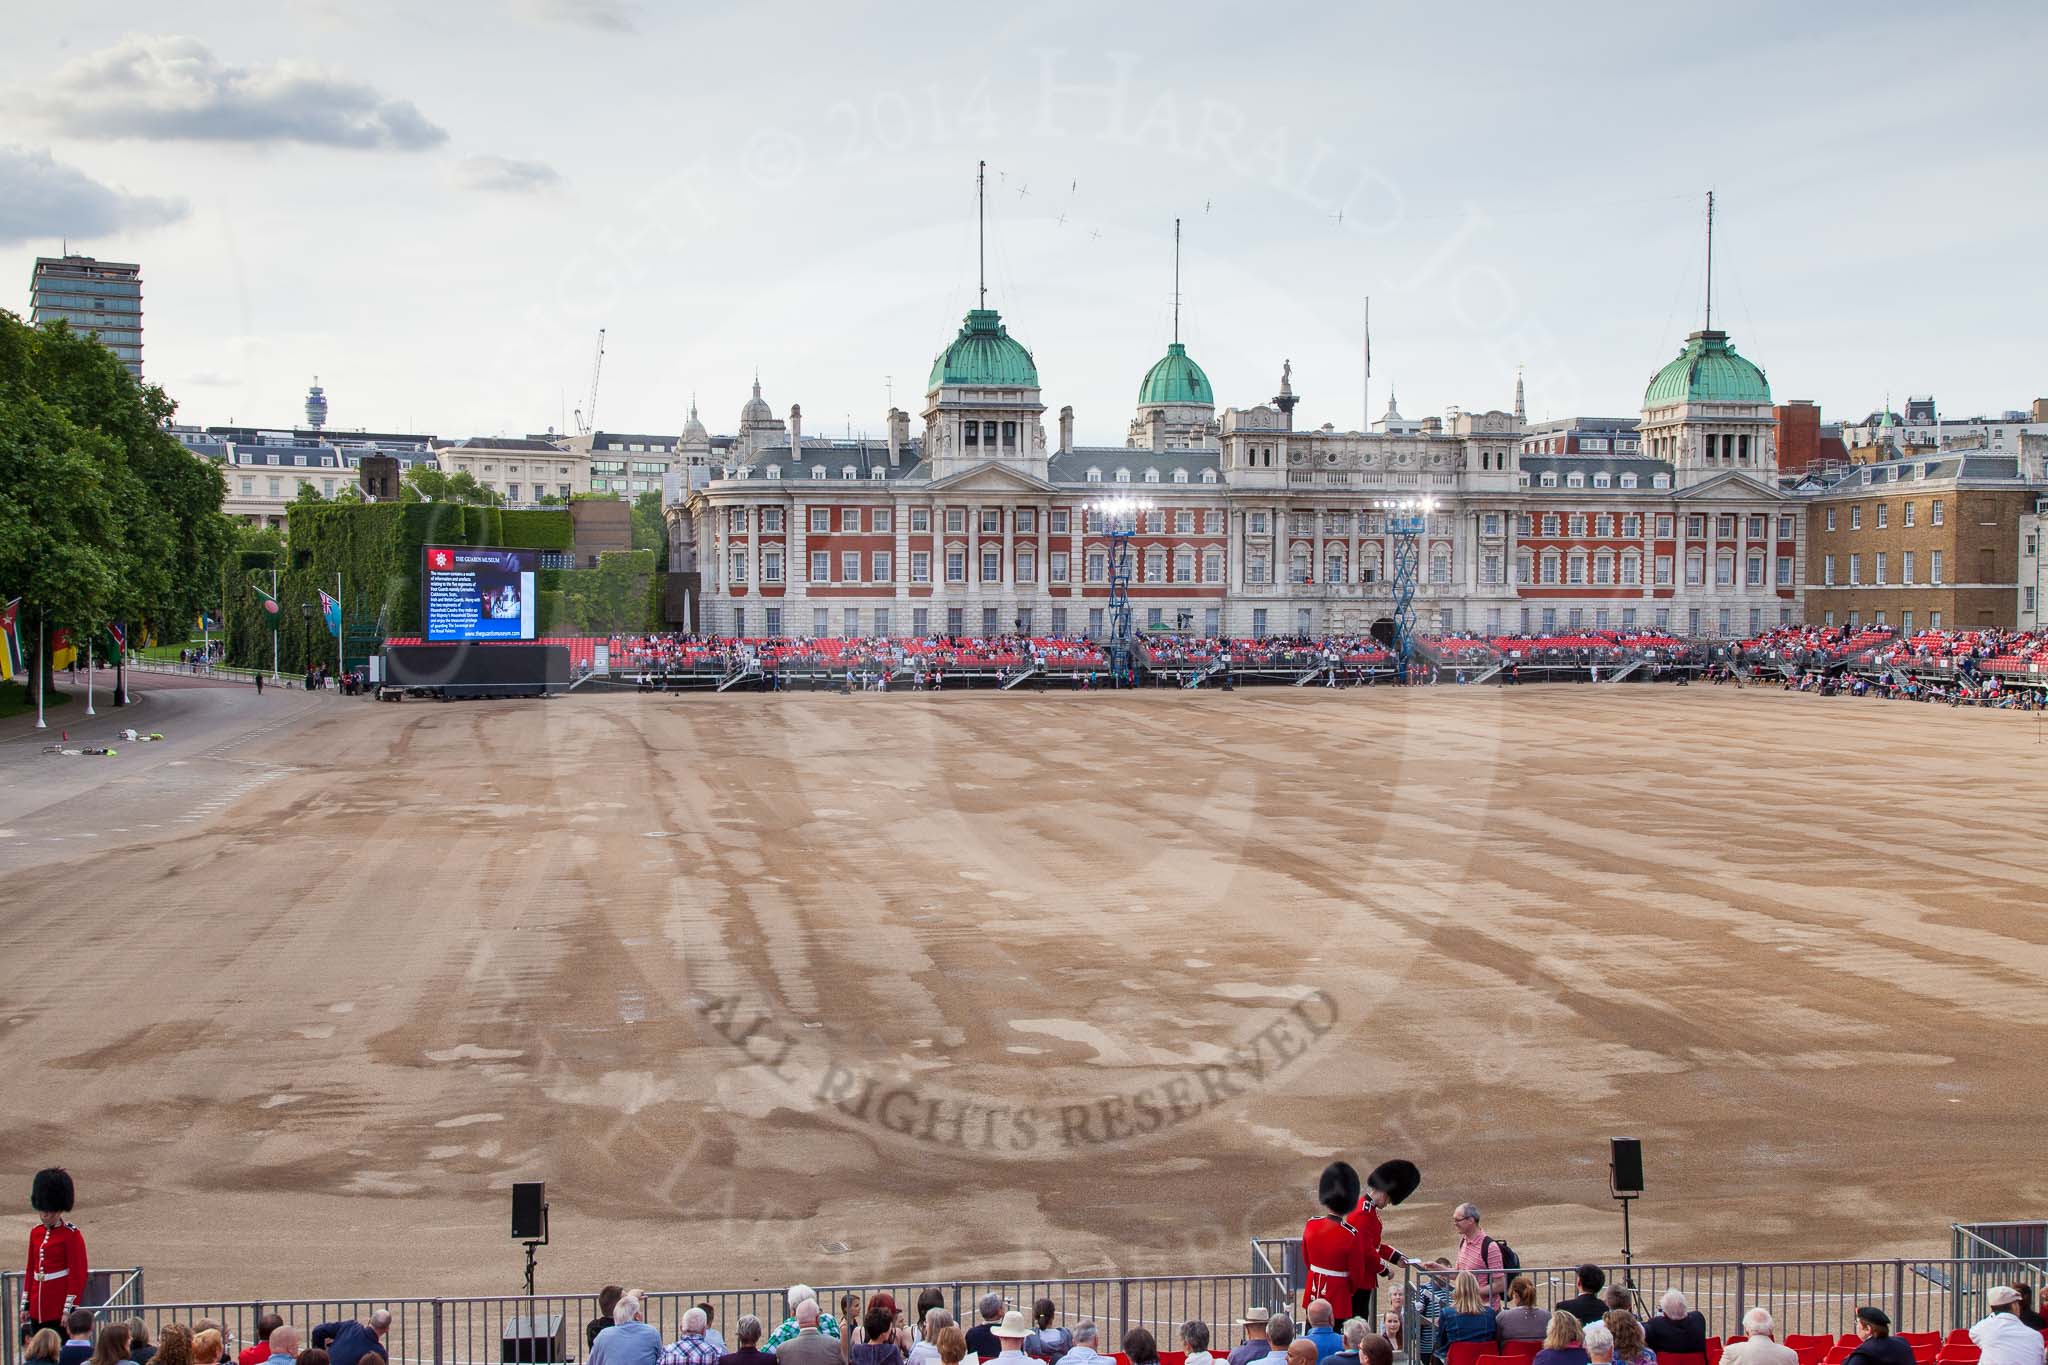 Beating Retreat 2014.
Horse Guards Parade, Westminster,
London SW1A,

United Kingdom,
on 11 June 2014 at 19:42, image #7